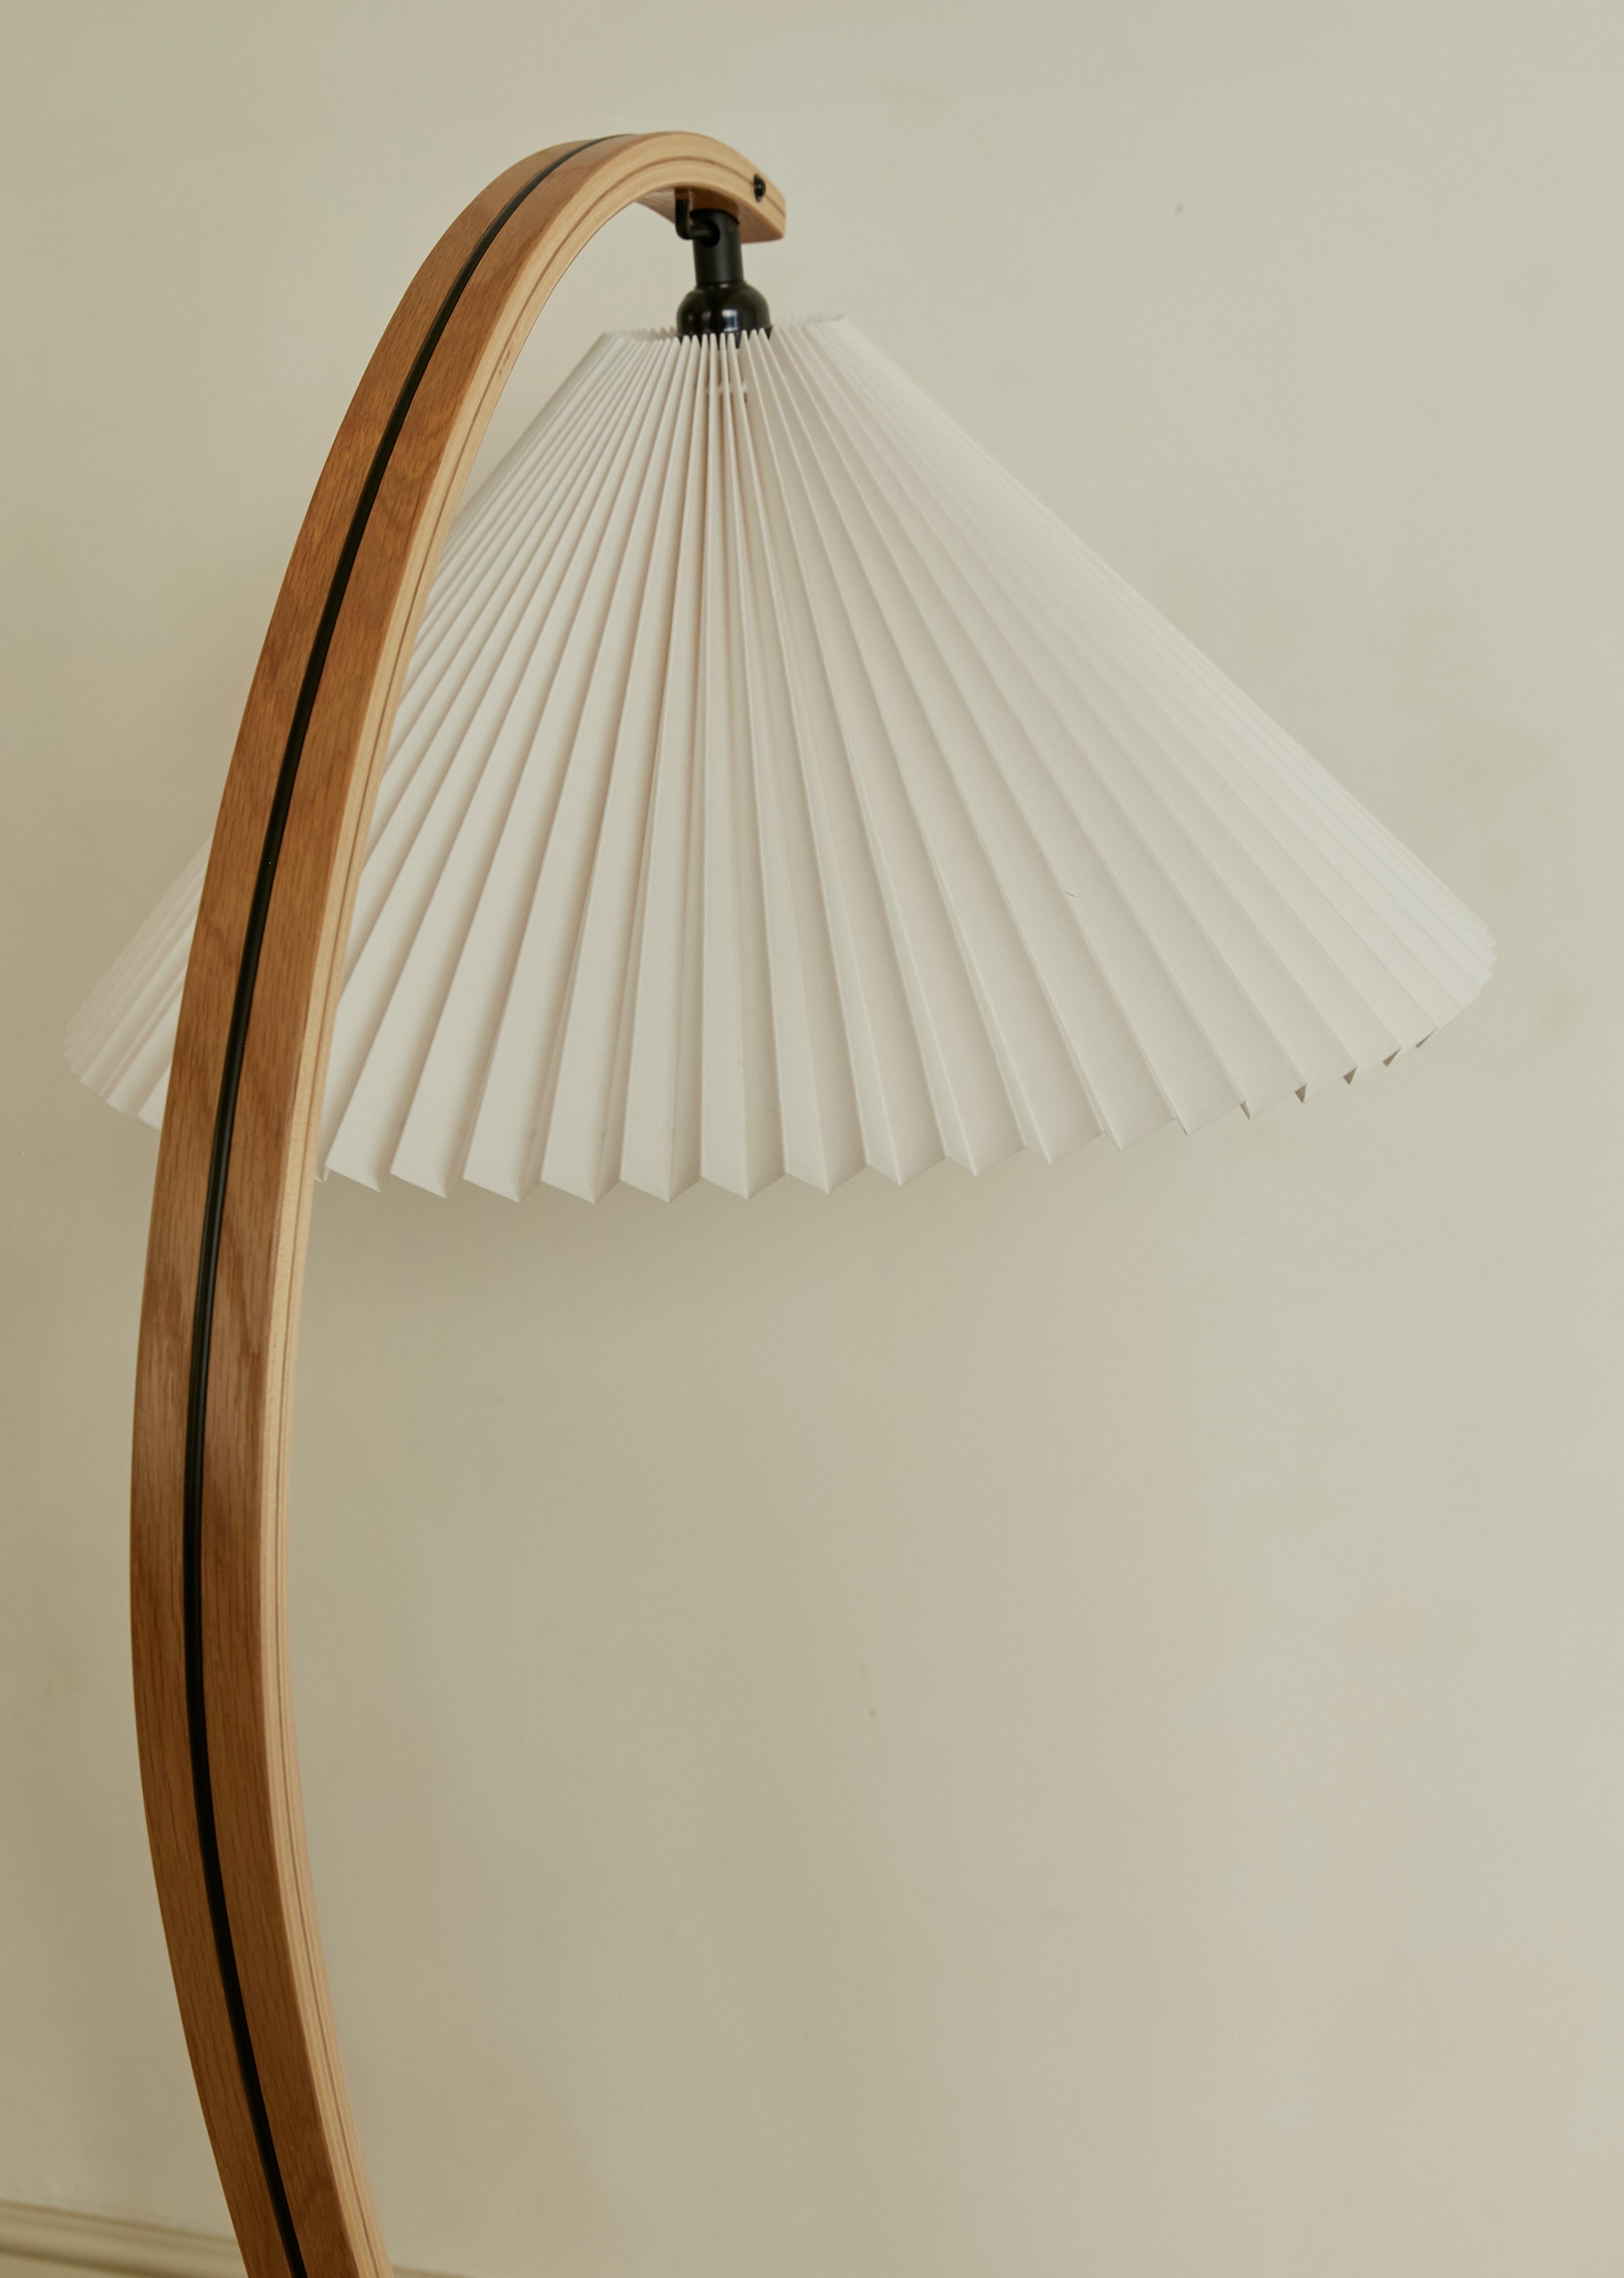 Late 17th Century Timberline floor lamp by Gubi, 1970's by Mads Caprani. Scandinavian design For Sale